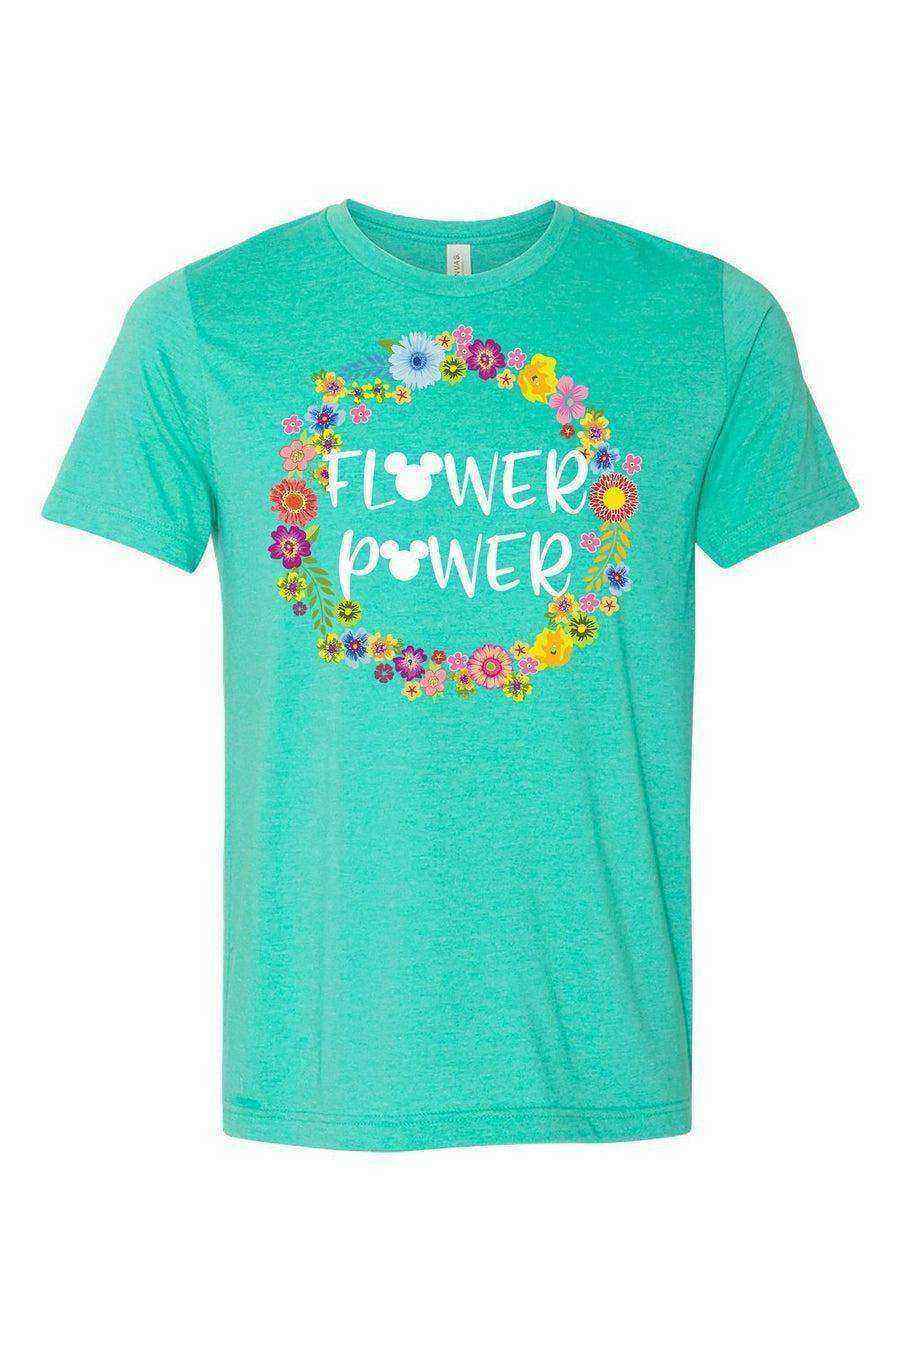 Youth | Flower Power Mickey Tee | Flower and Garden Festival - Dylan's Tees